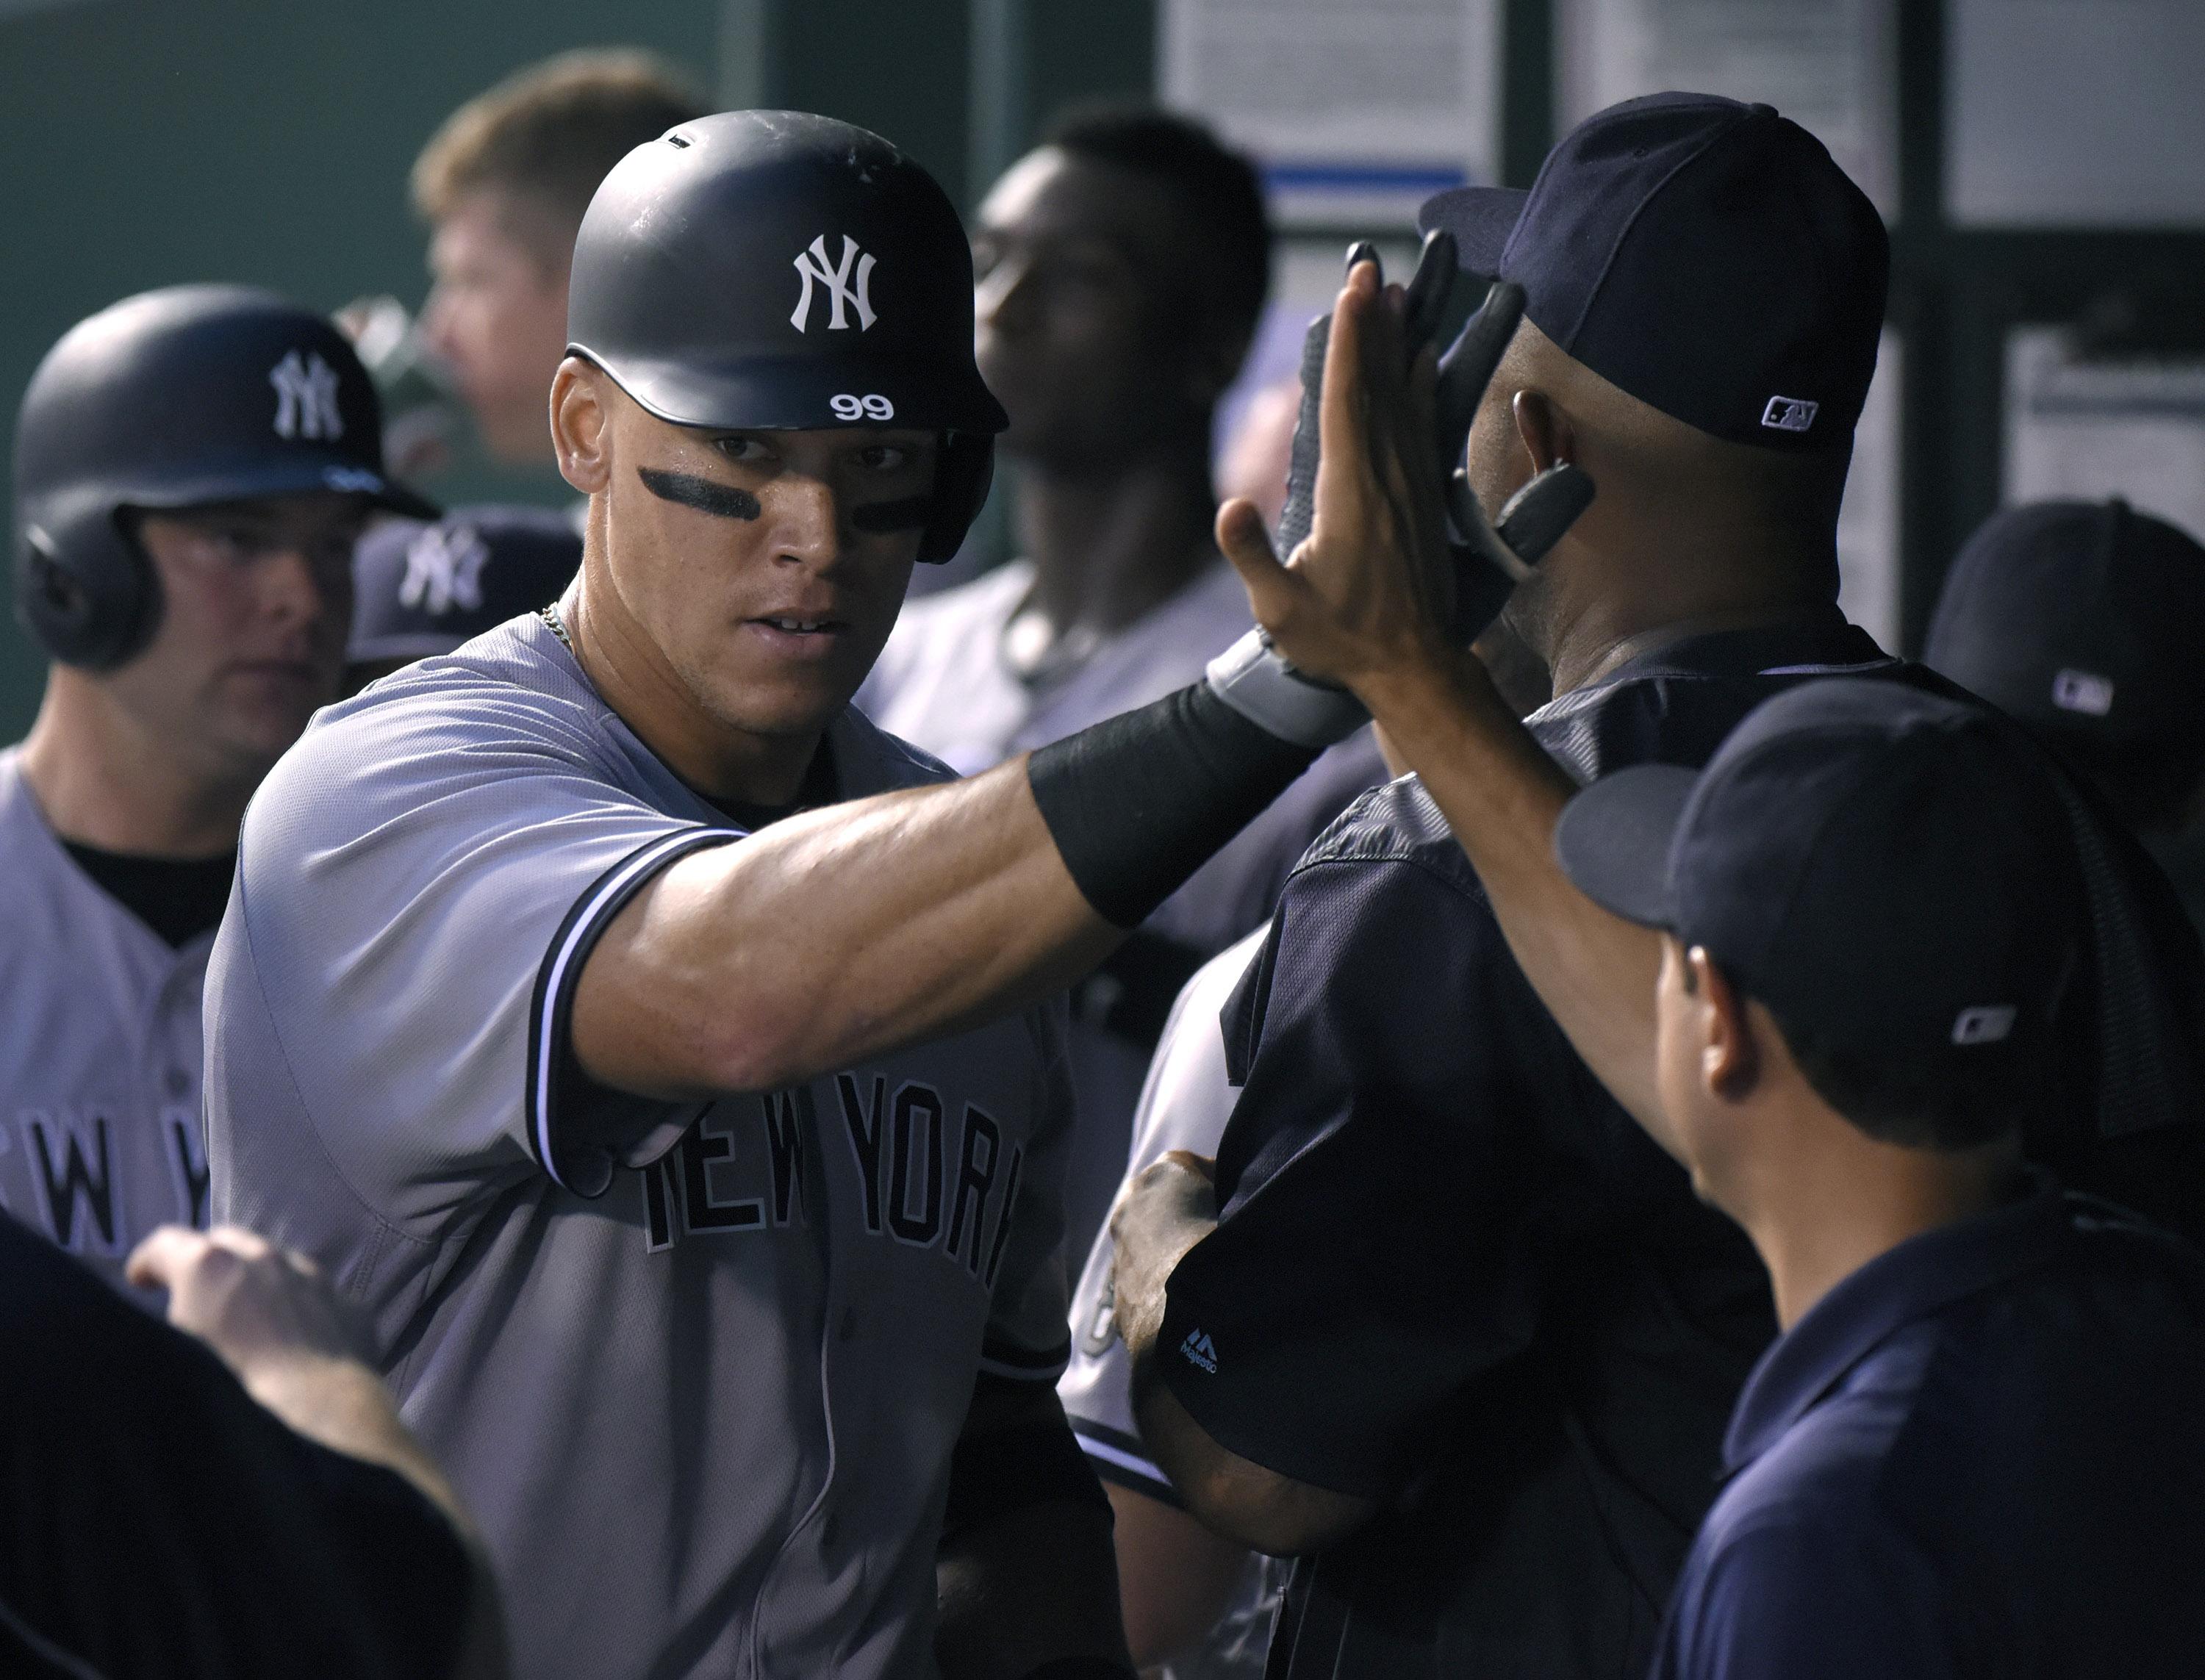 KANSAS CITY, MO - AUGUST 30: Aaron Judge #99 of the New York Yankees is congratulated by teammates after hitting a two-run home run against the Kansas City Royals in the second inning at Kauffman Stadium on August 30, 2016 in Kansas City, Missouri. (Photo by Ed Zurga/Getty Images)